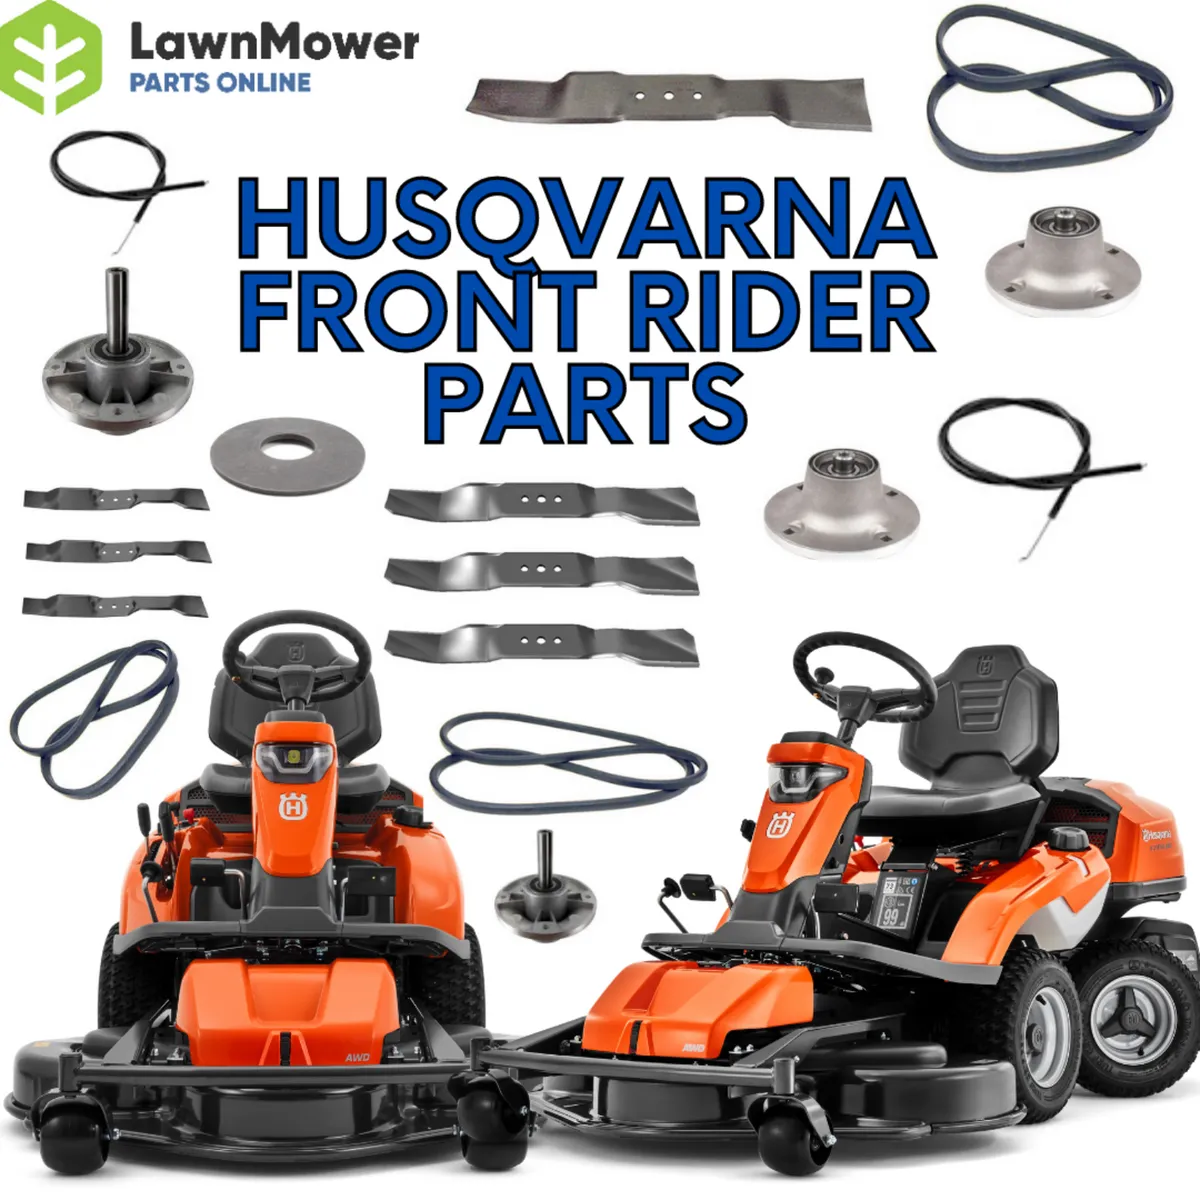 Husqvarna Front Rider Parts - FREE Delivery for sale in Co